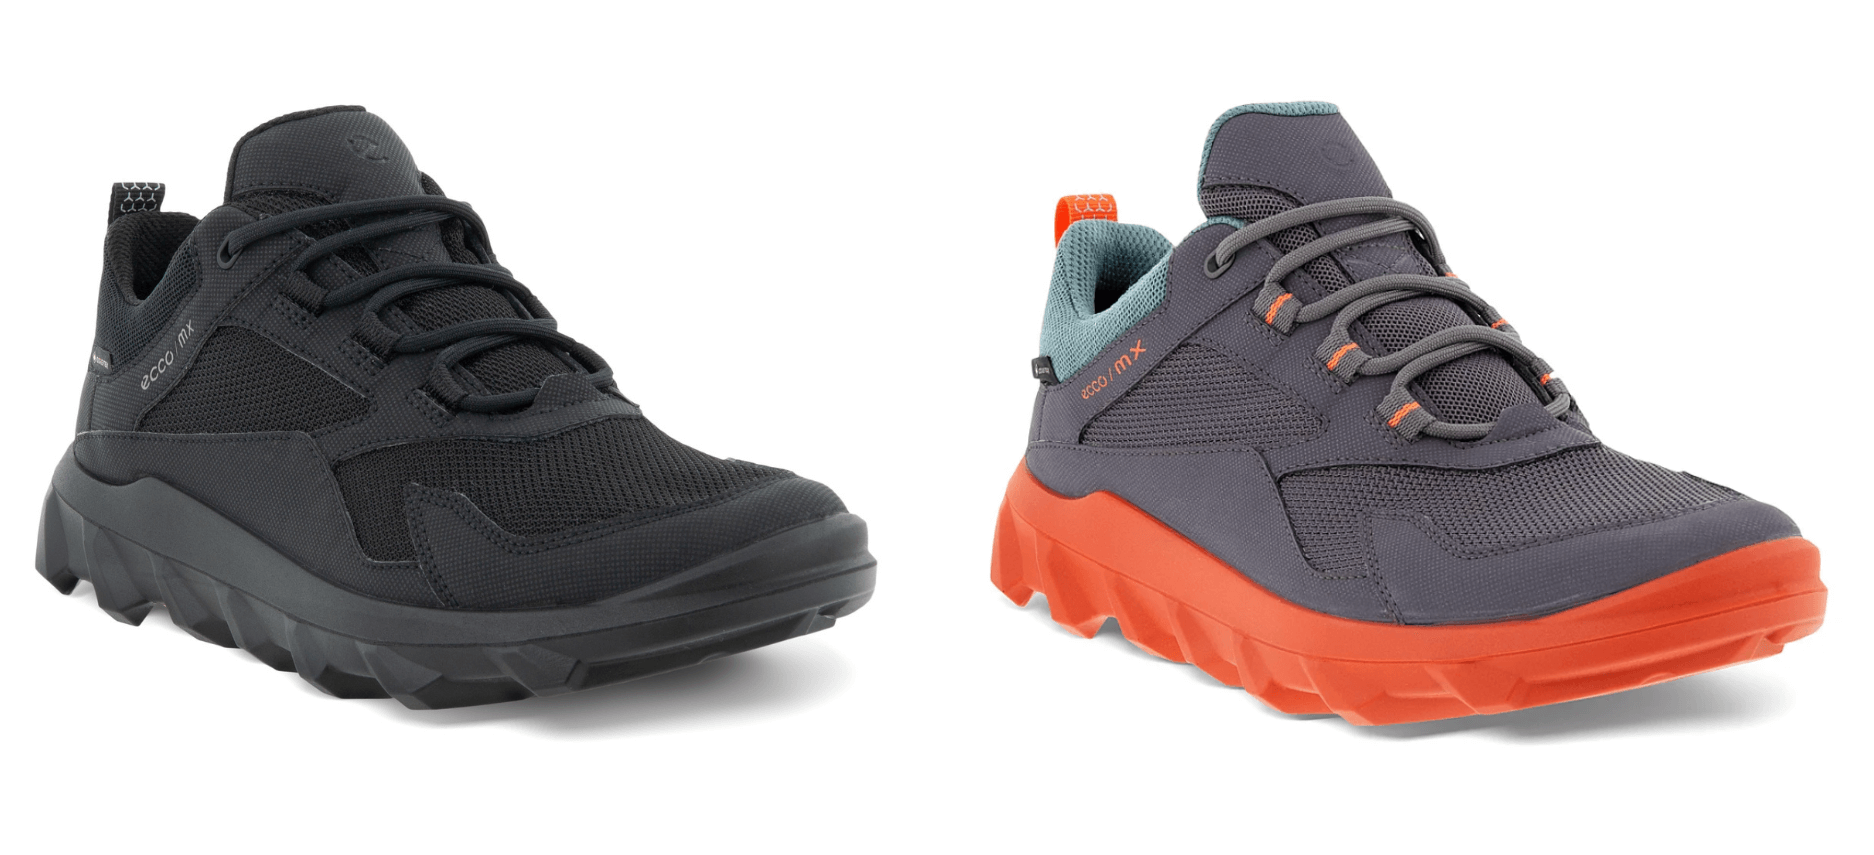 Ambassade Vise dig Proportional Win a pair of waterproof ECCO MX shoes worth £110 - Wired For Adventure